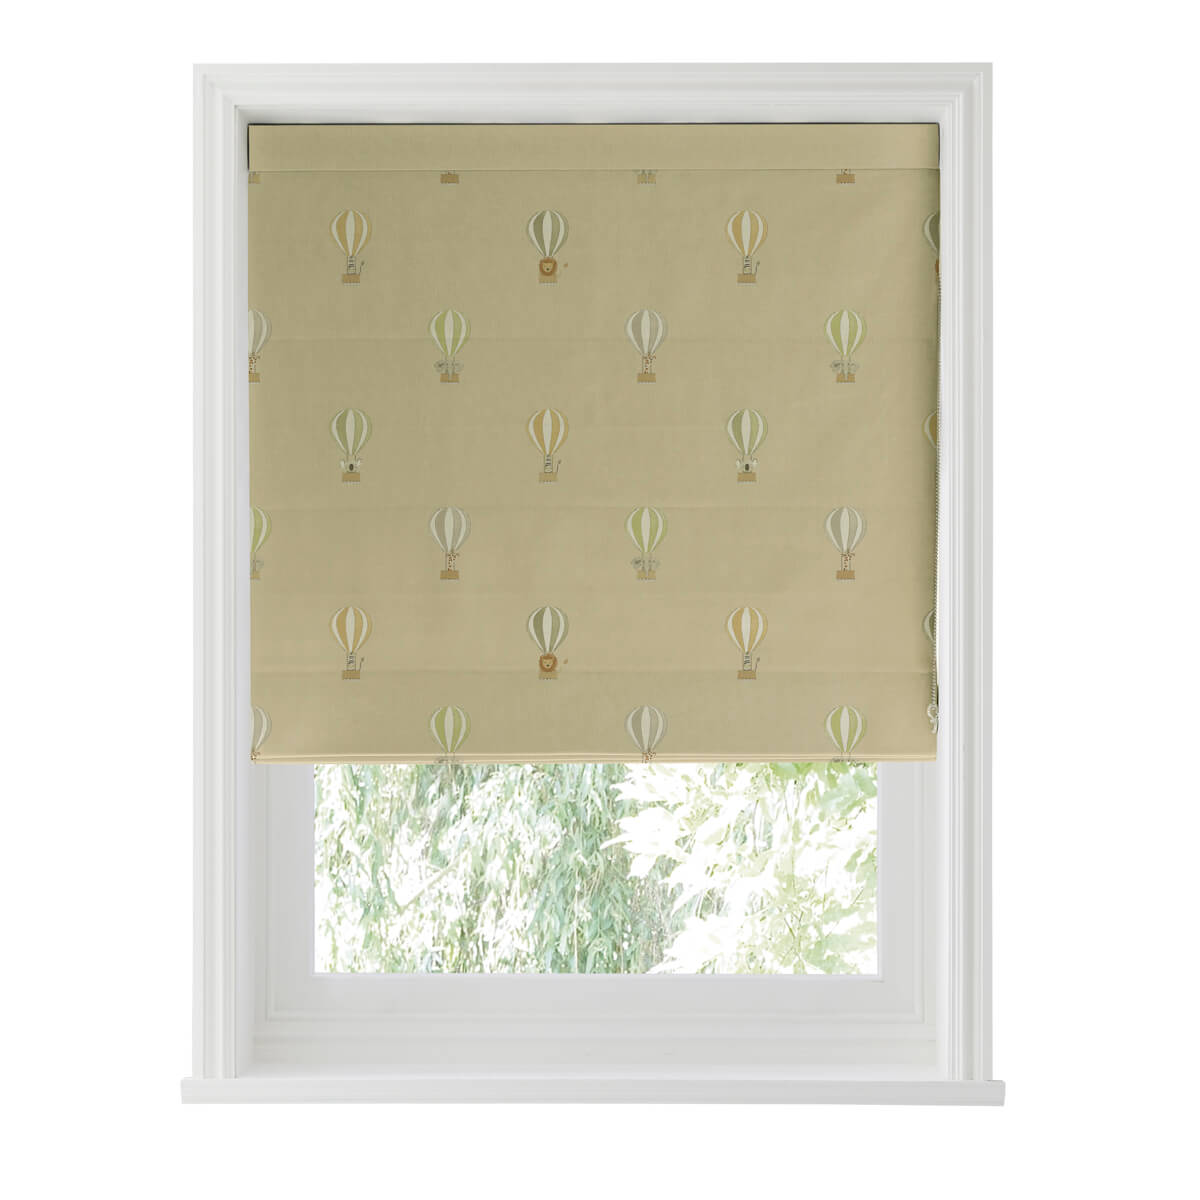 Bears & Balloons Pale Rust Gold Made to Measure Roman Blind